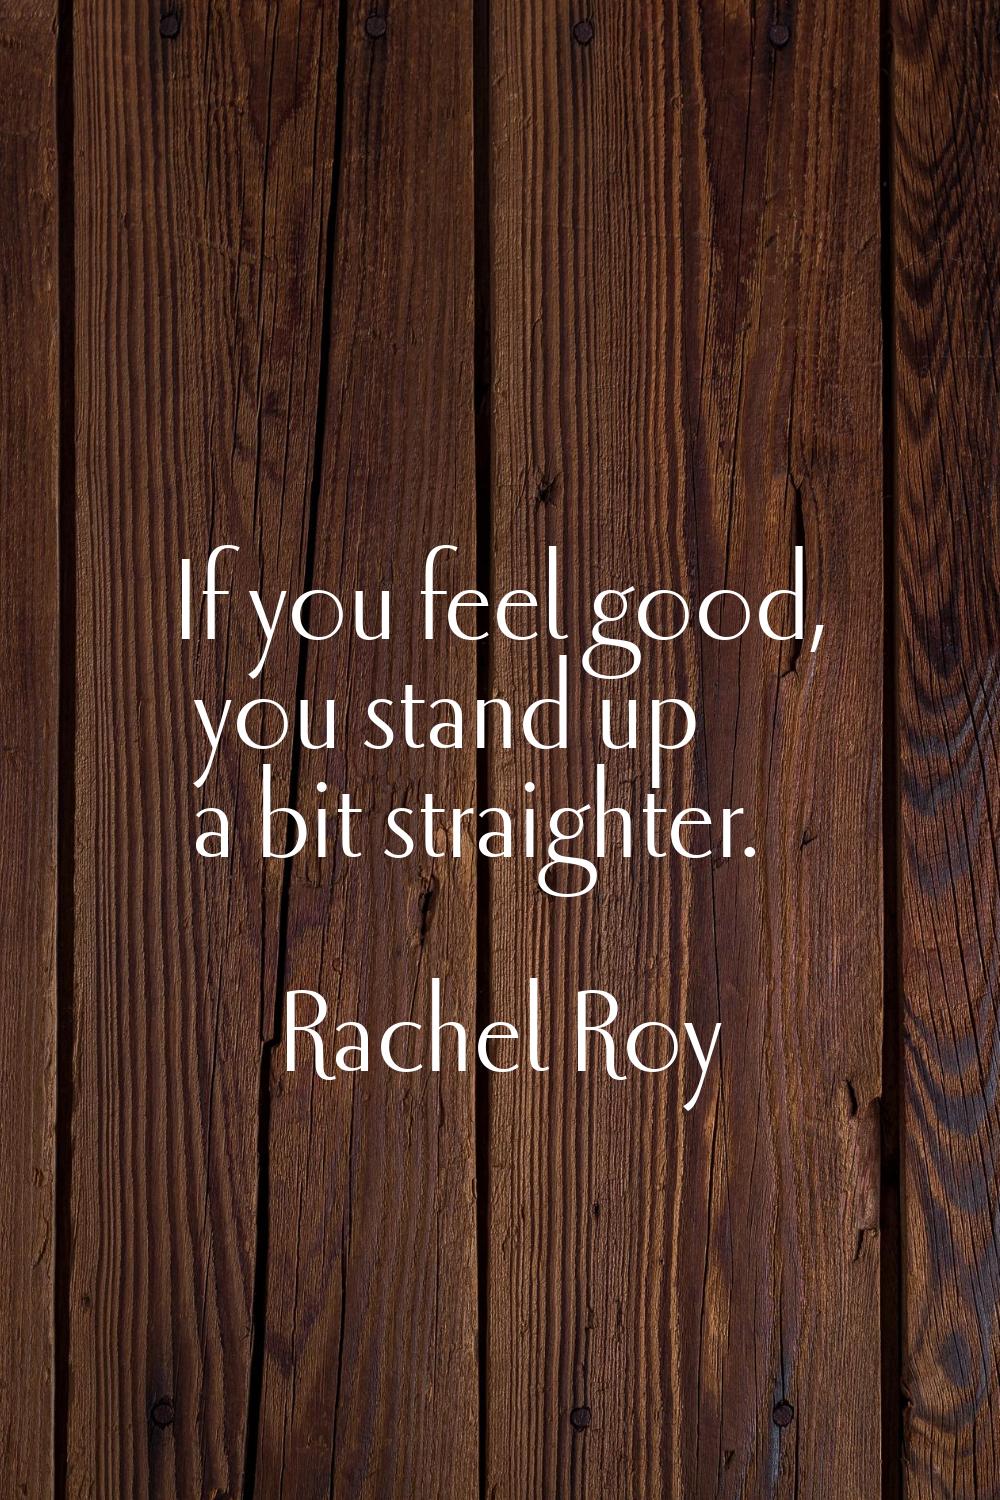 If you feel good, you stand up a bit straighter.